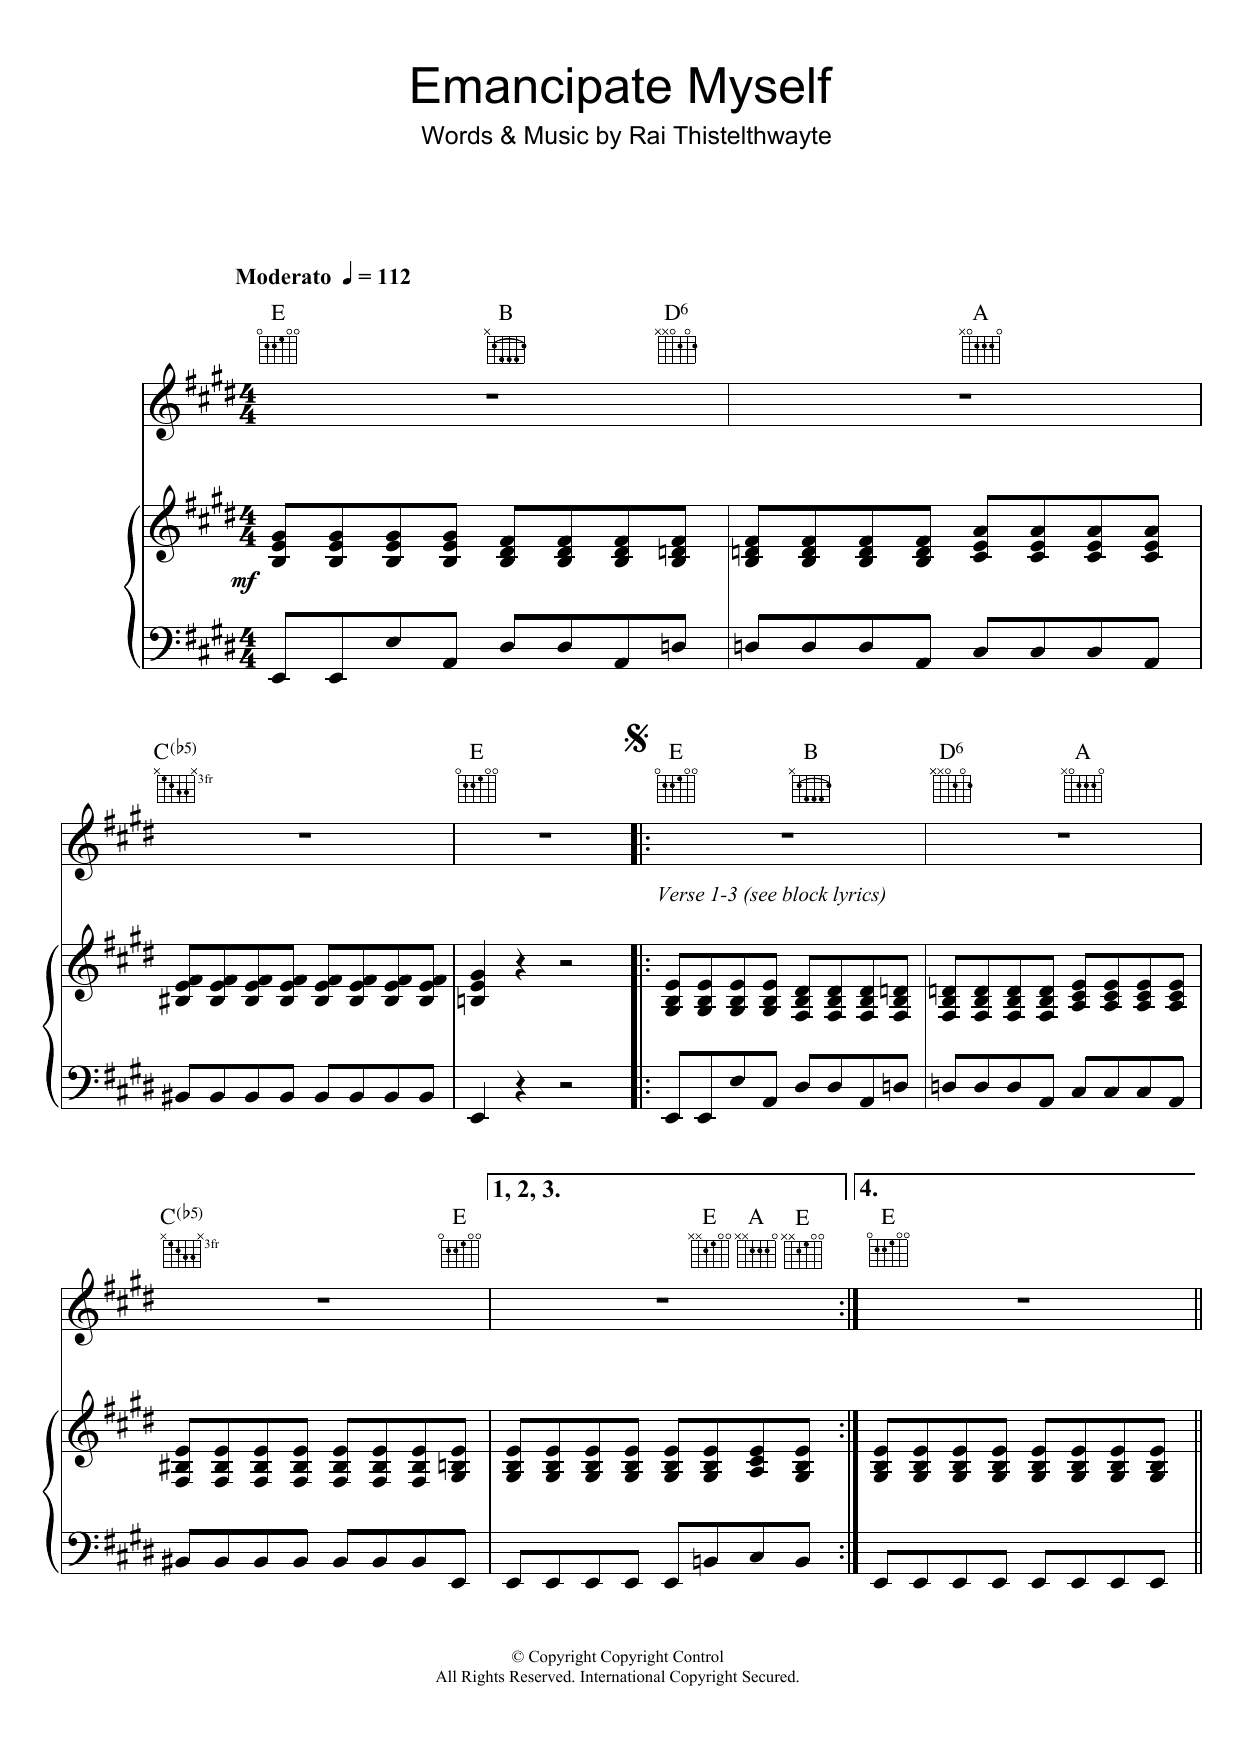 Thirsty Merc Emancipate Myself sheet music preview music notes and score for Piano, Vocal & Guitar including 6 page(s)